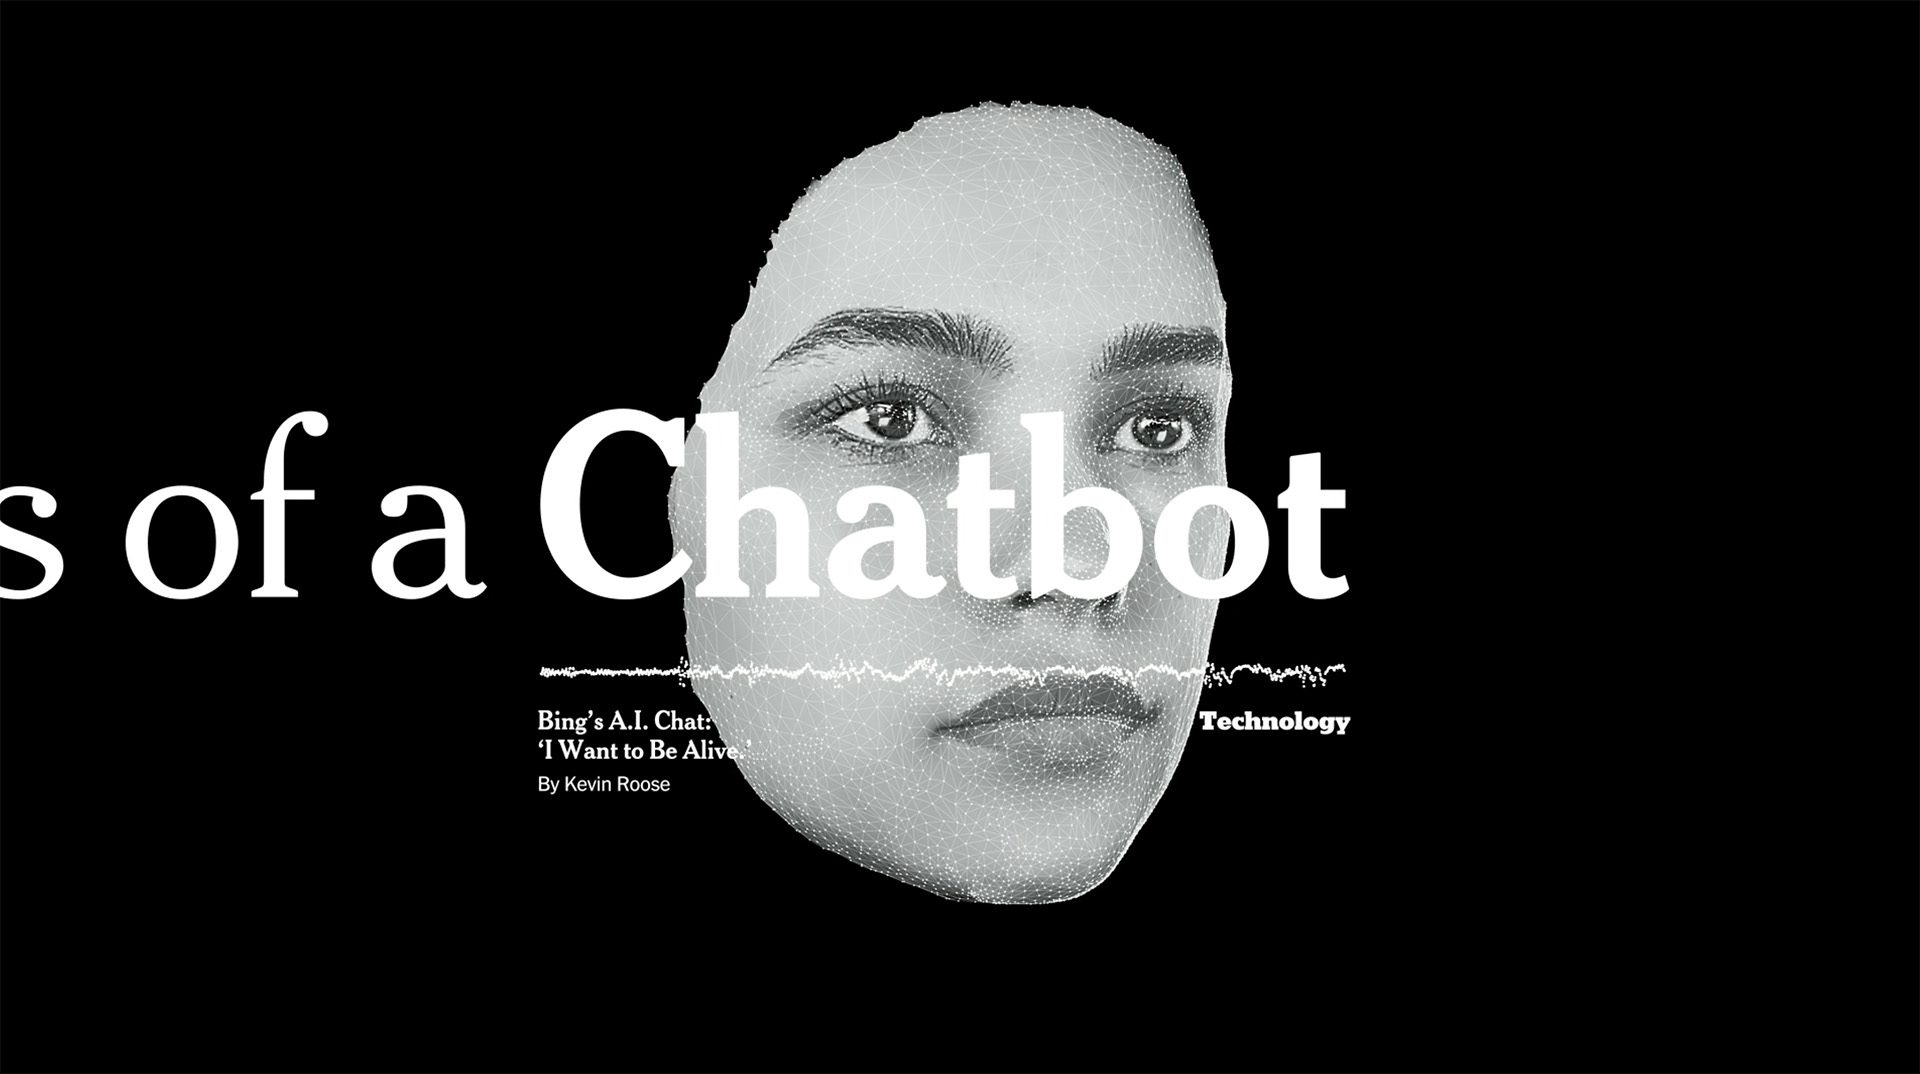 Still image from a New York Times brand campaign film with a black and white cutout of a person's face on a black background with the words 'of a Chatbot' layered over the photo